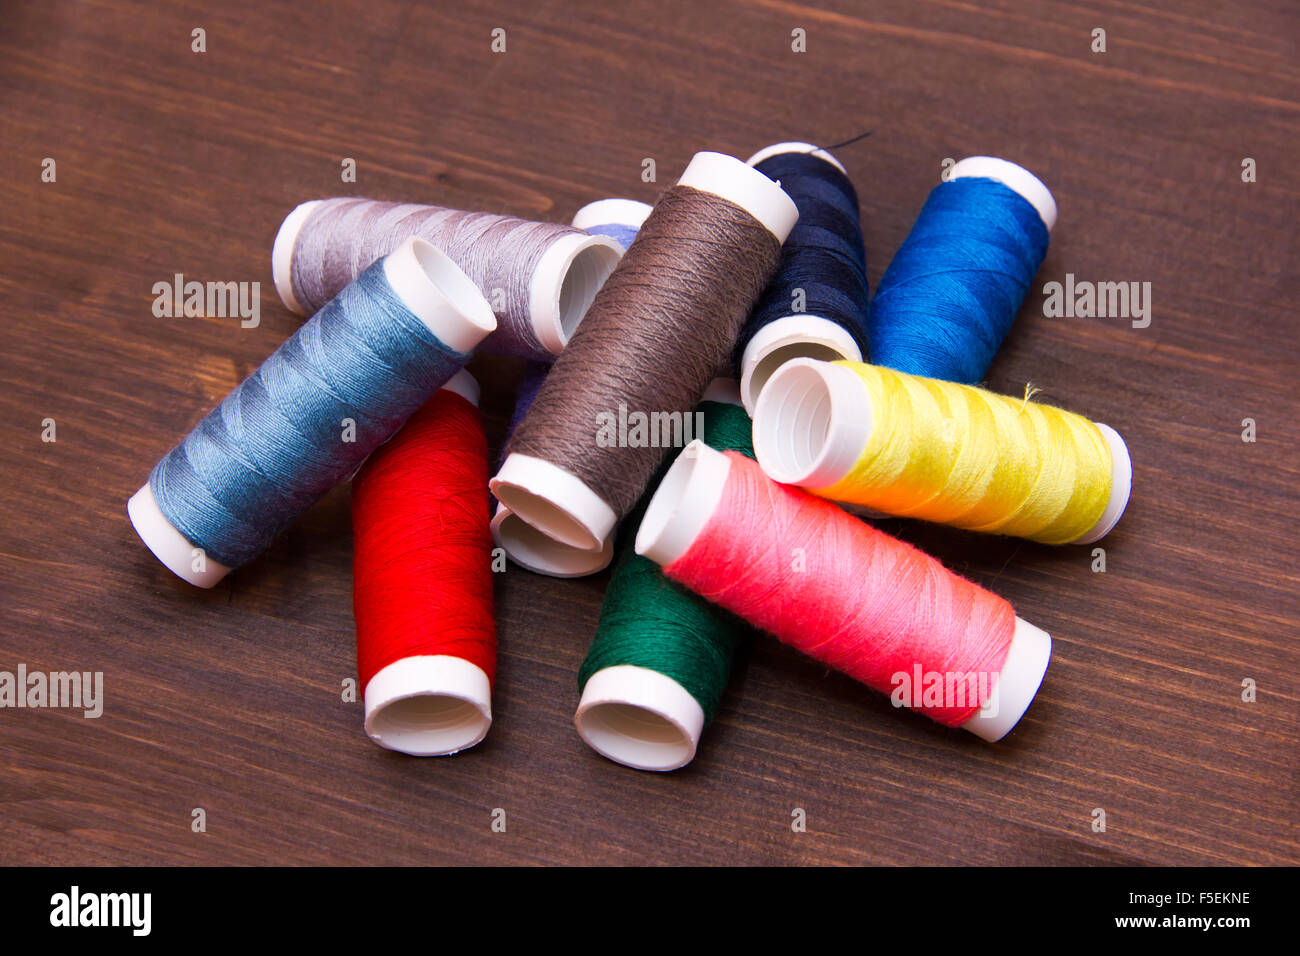 Sewing thread in different colors on wooden table Stock Photo